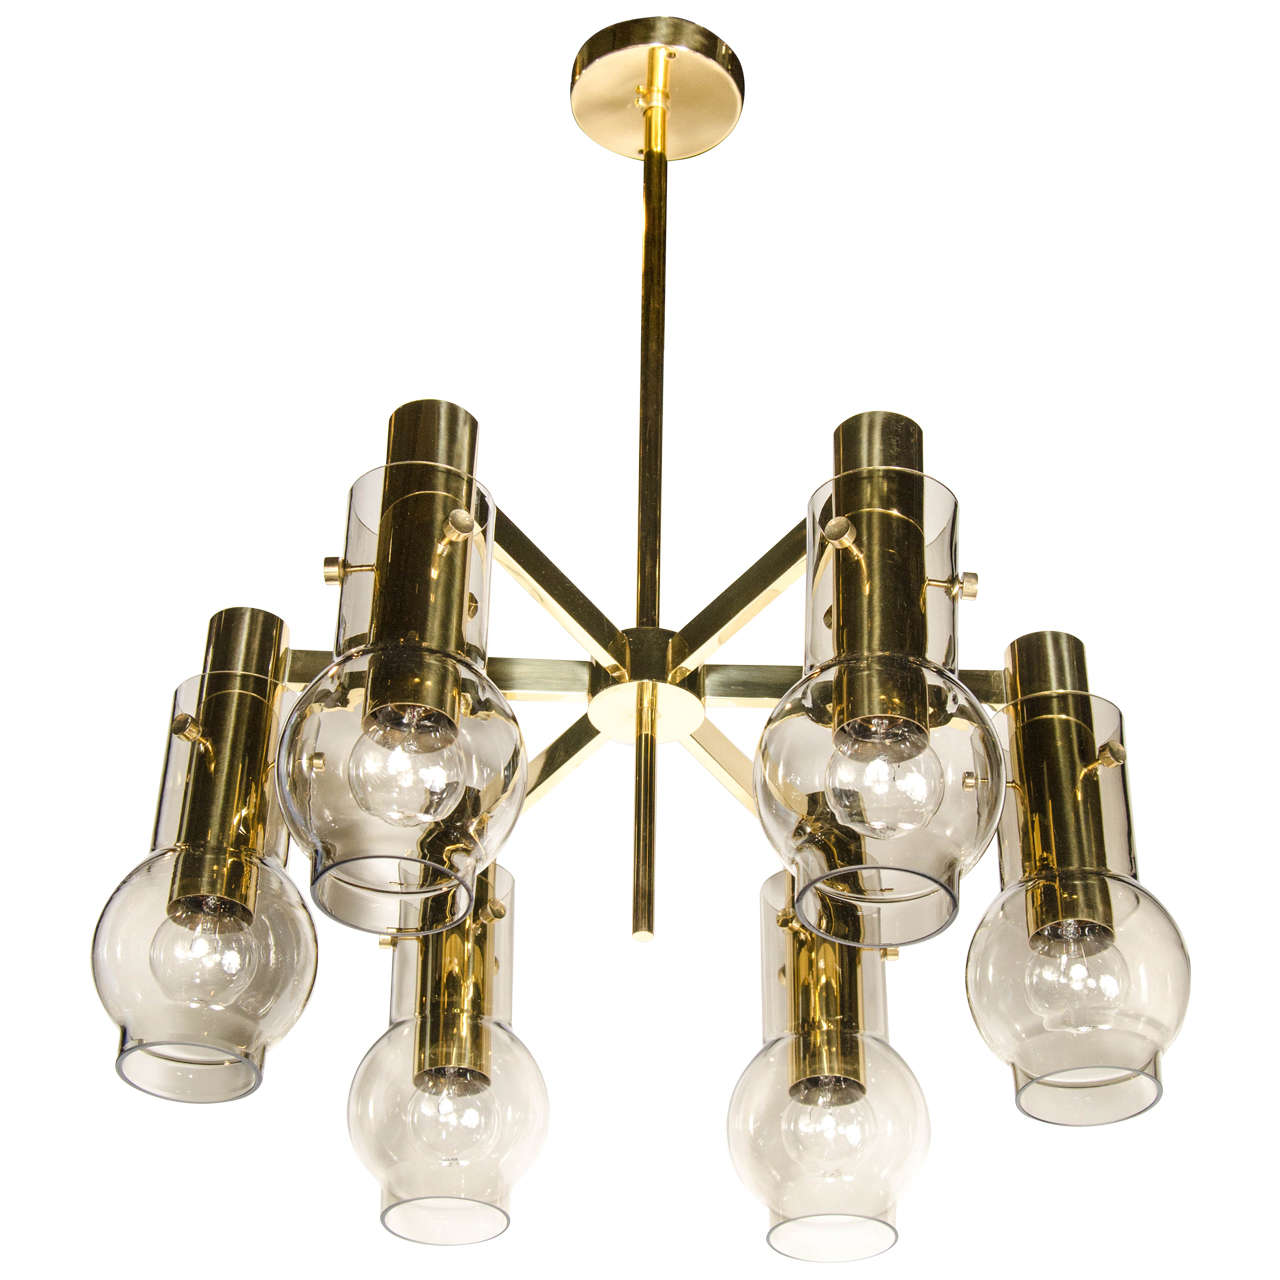 Mid-Century Modern Brass & Smoked Glass 6-Arm Chandelier by Hans Agne Jakobsson For Sale